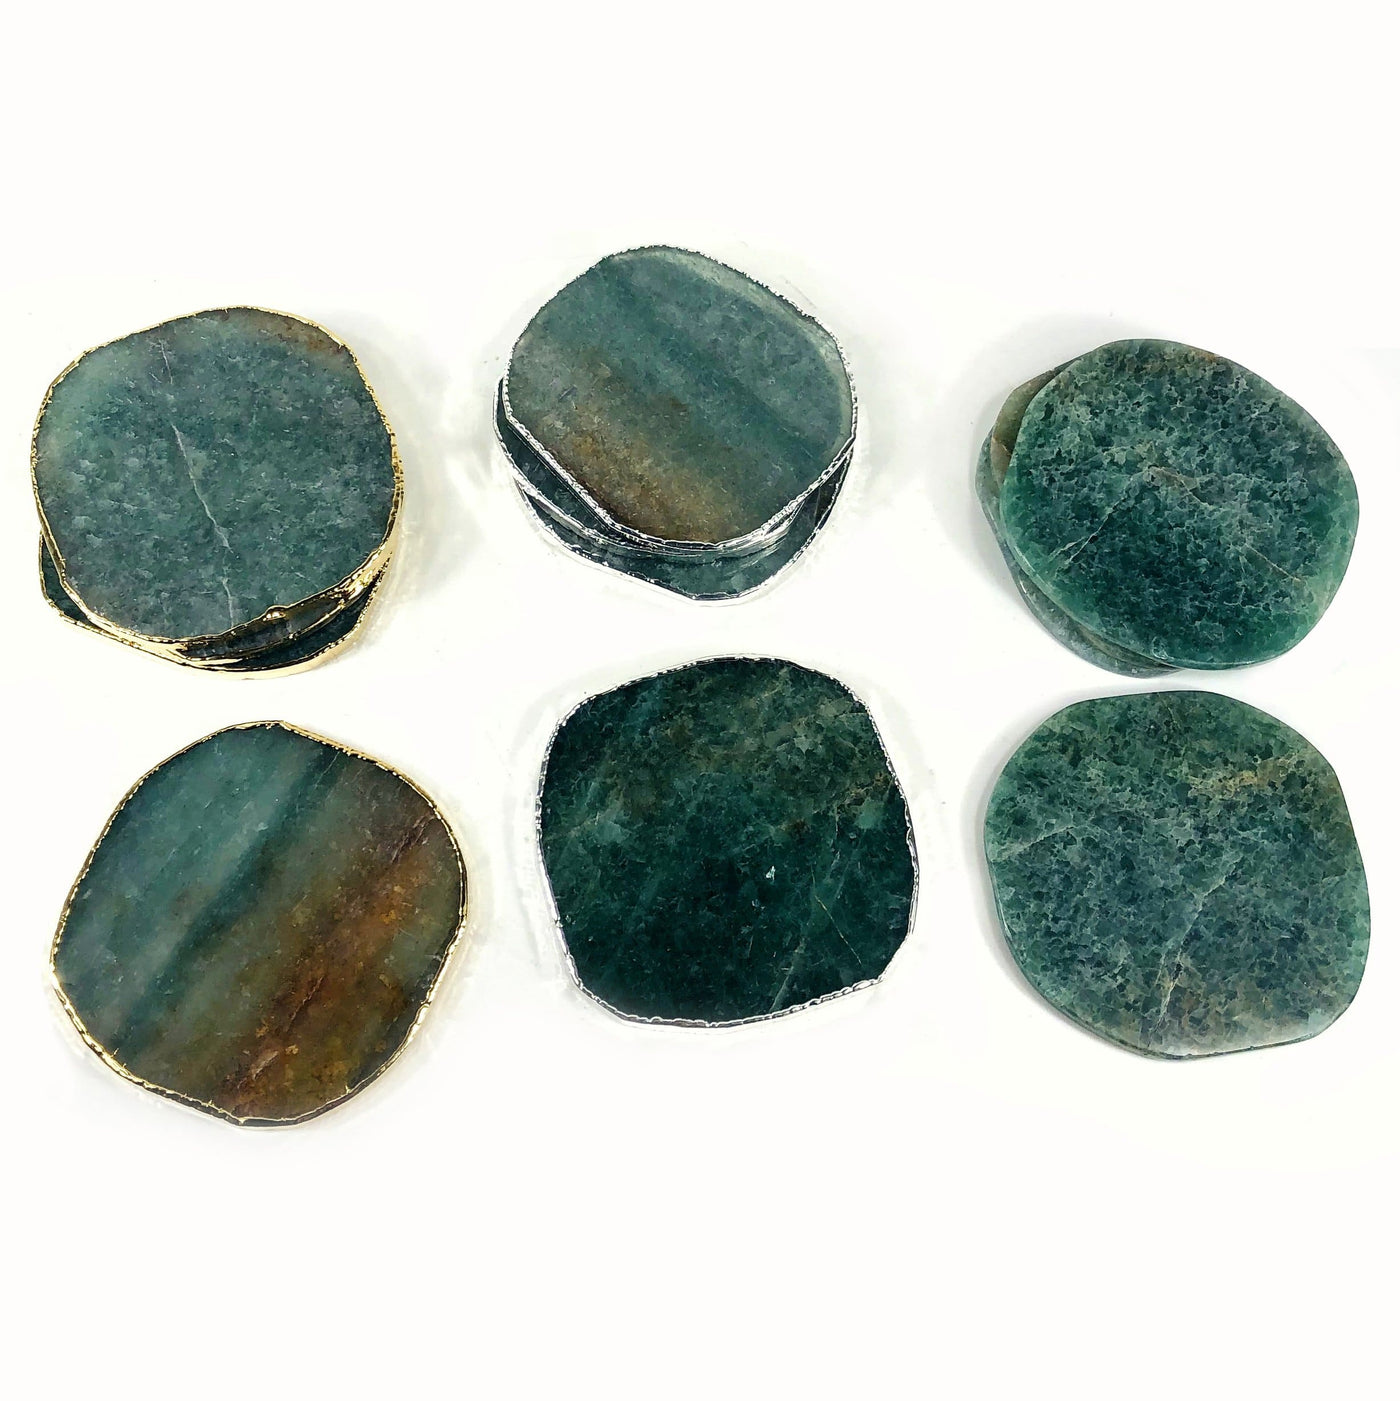 green quartz coasters displayed to show variation in color plating and raw edge